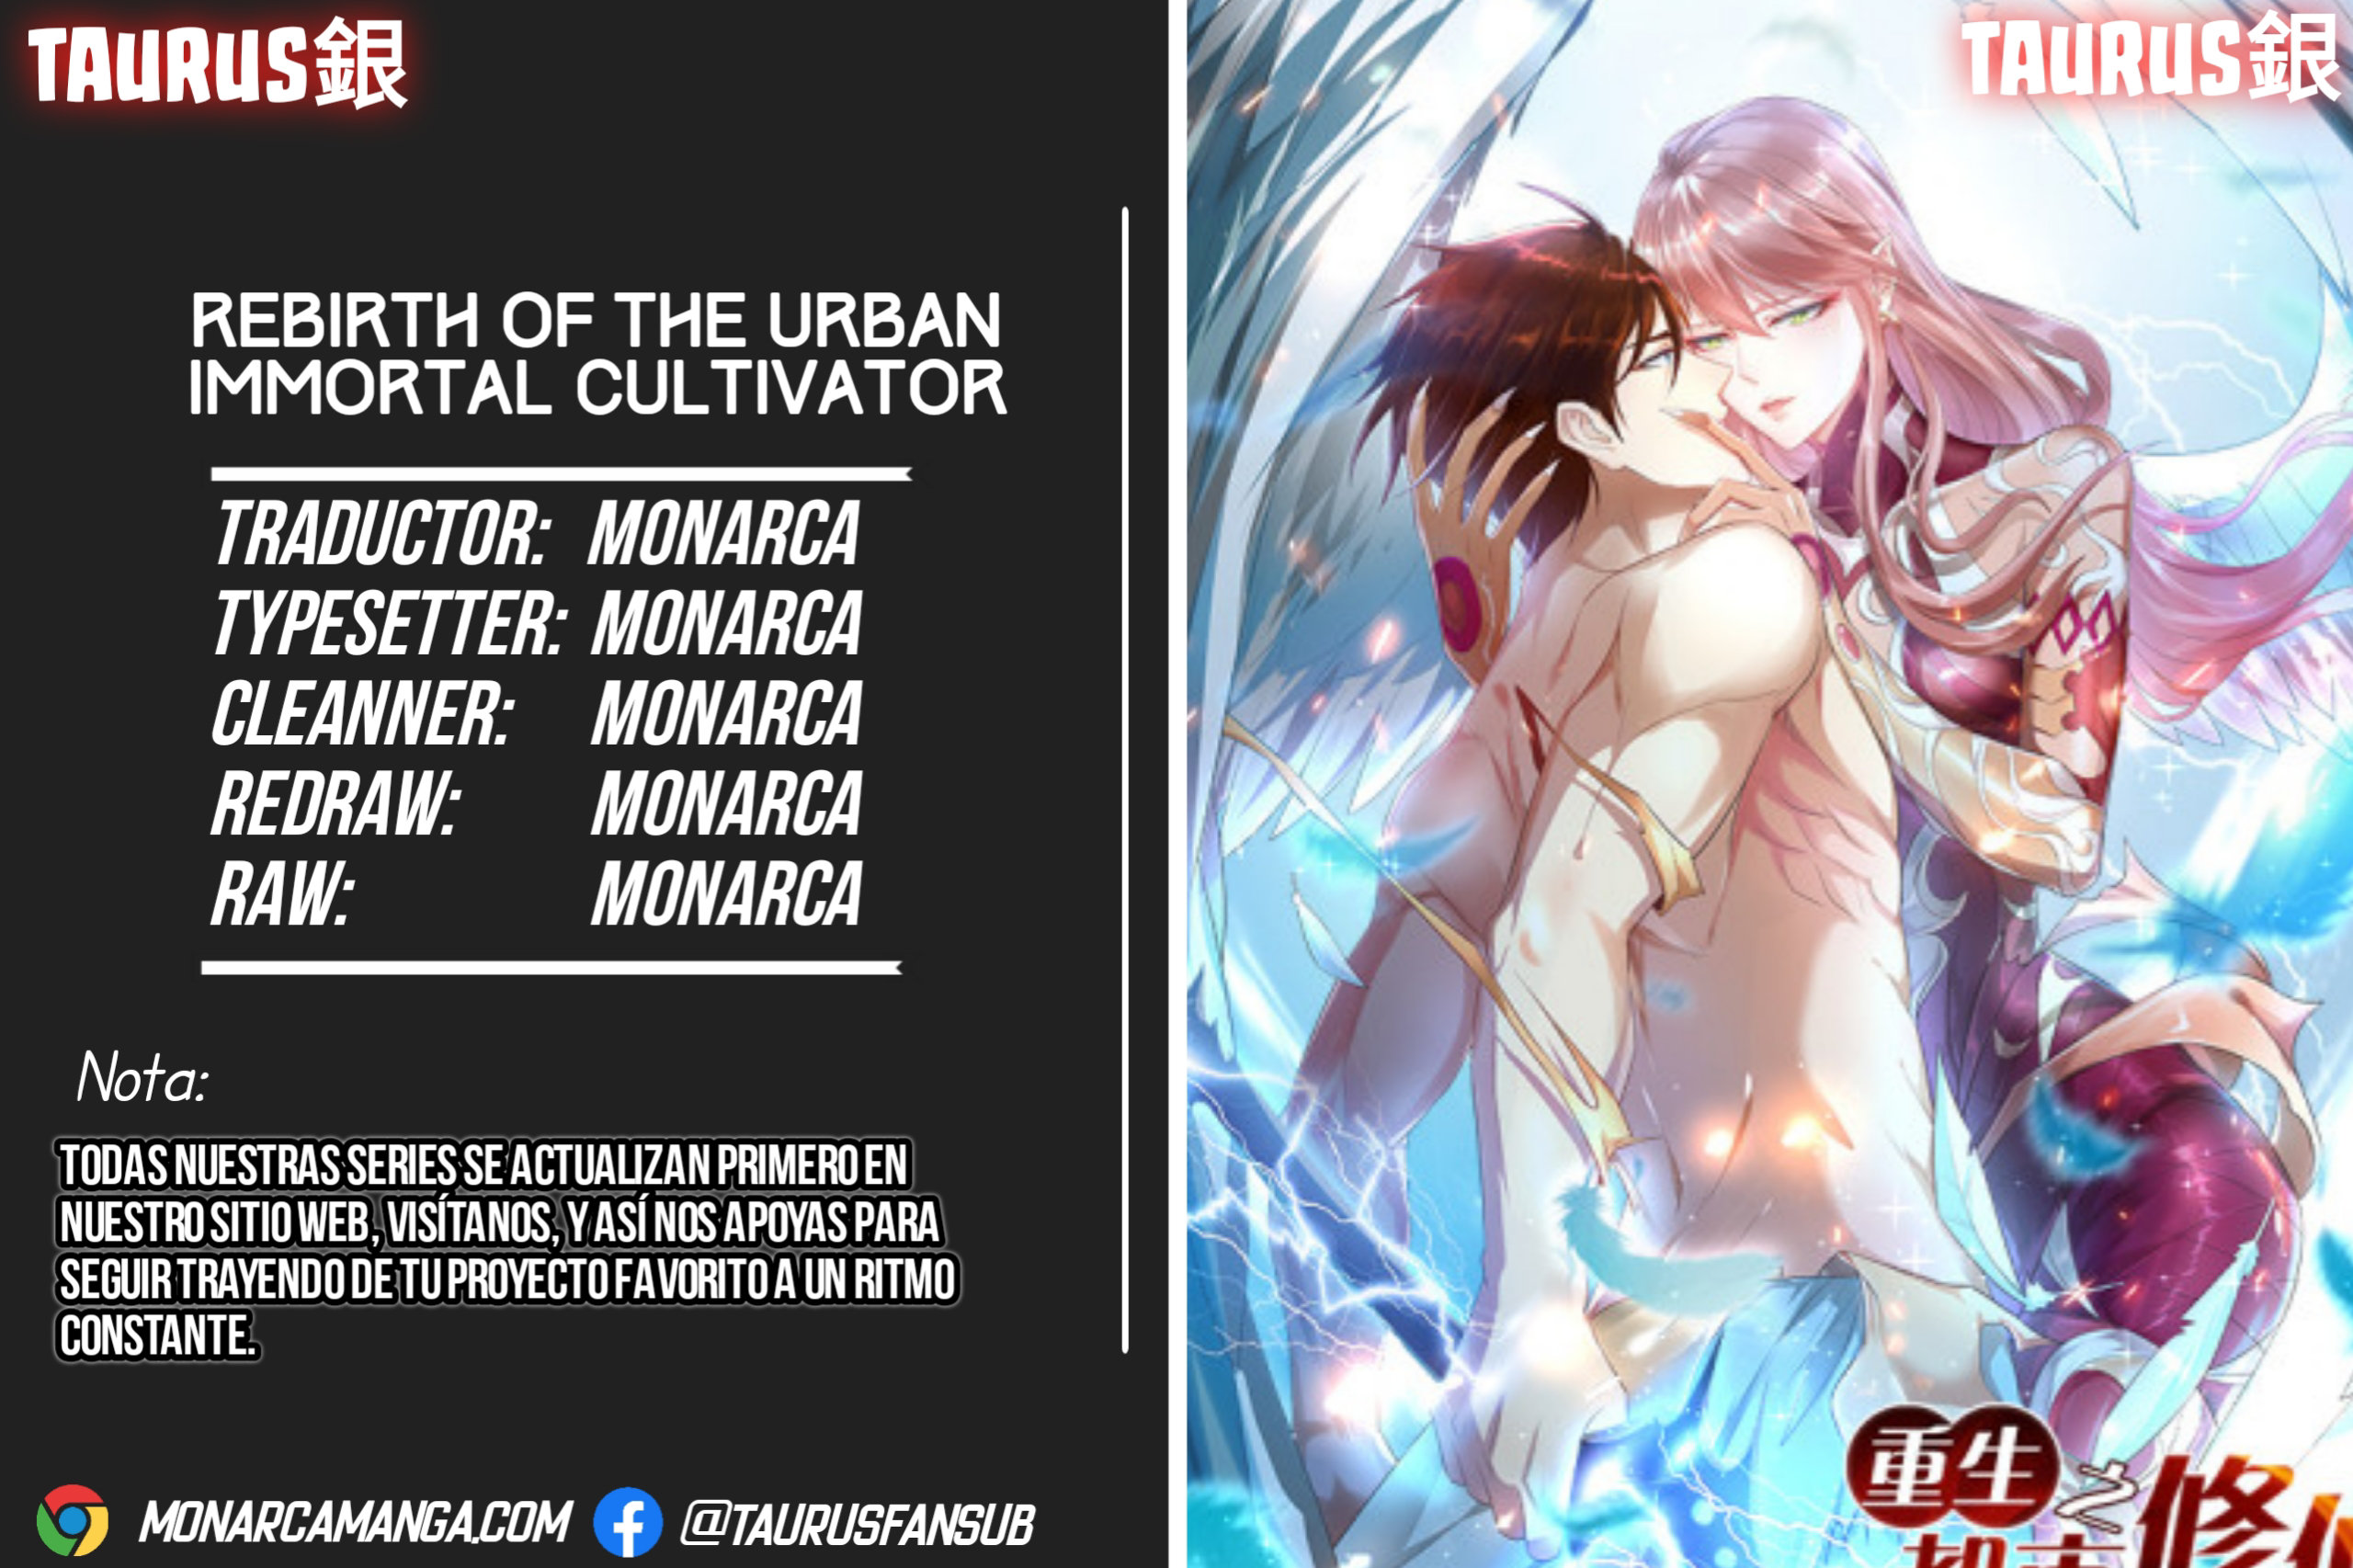 Manga Rebirth Of The Urban Immortal Cultivator Chapter 720 image number 9